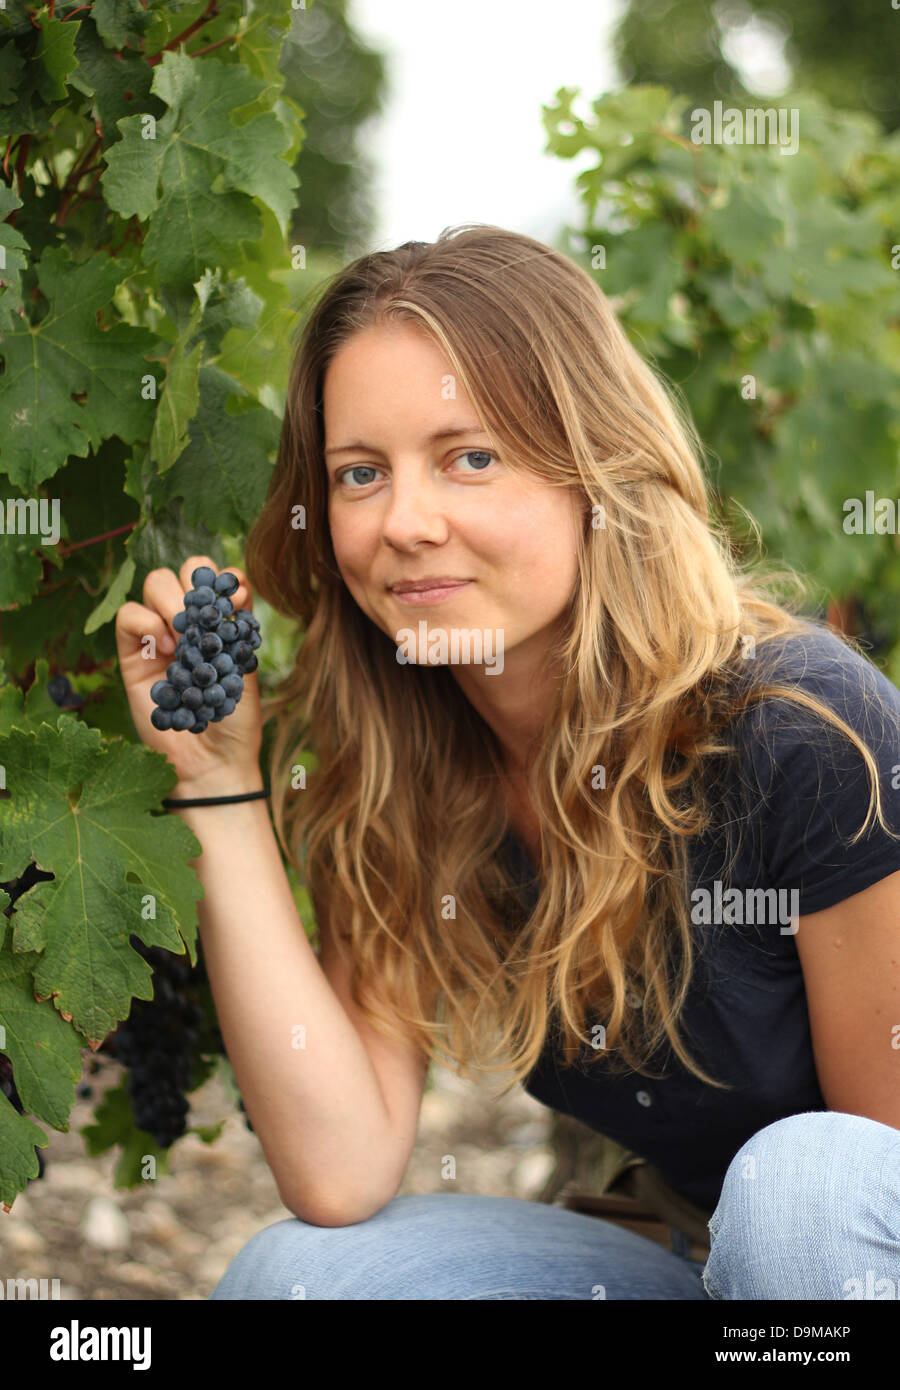 Blond young woman holding a grape looking at camera in the vineyard Stock Photo